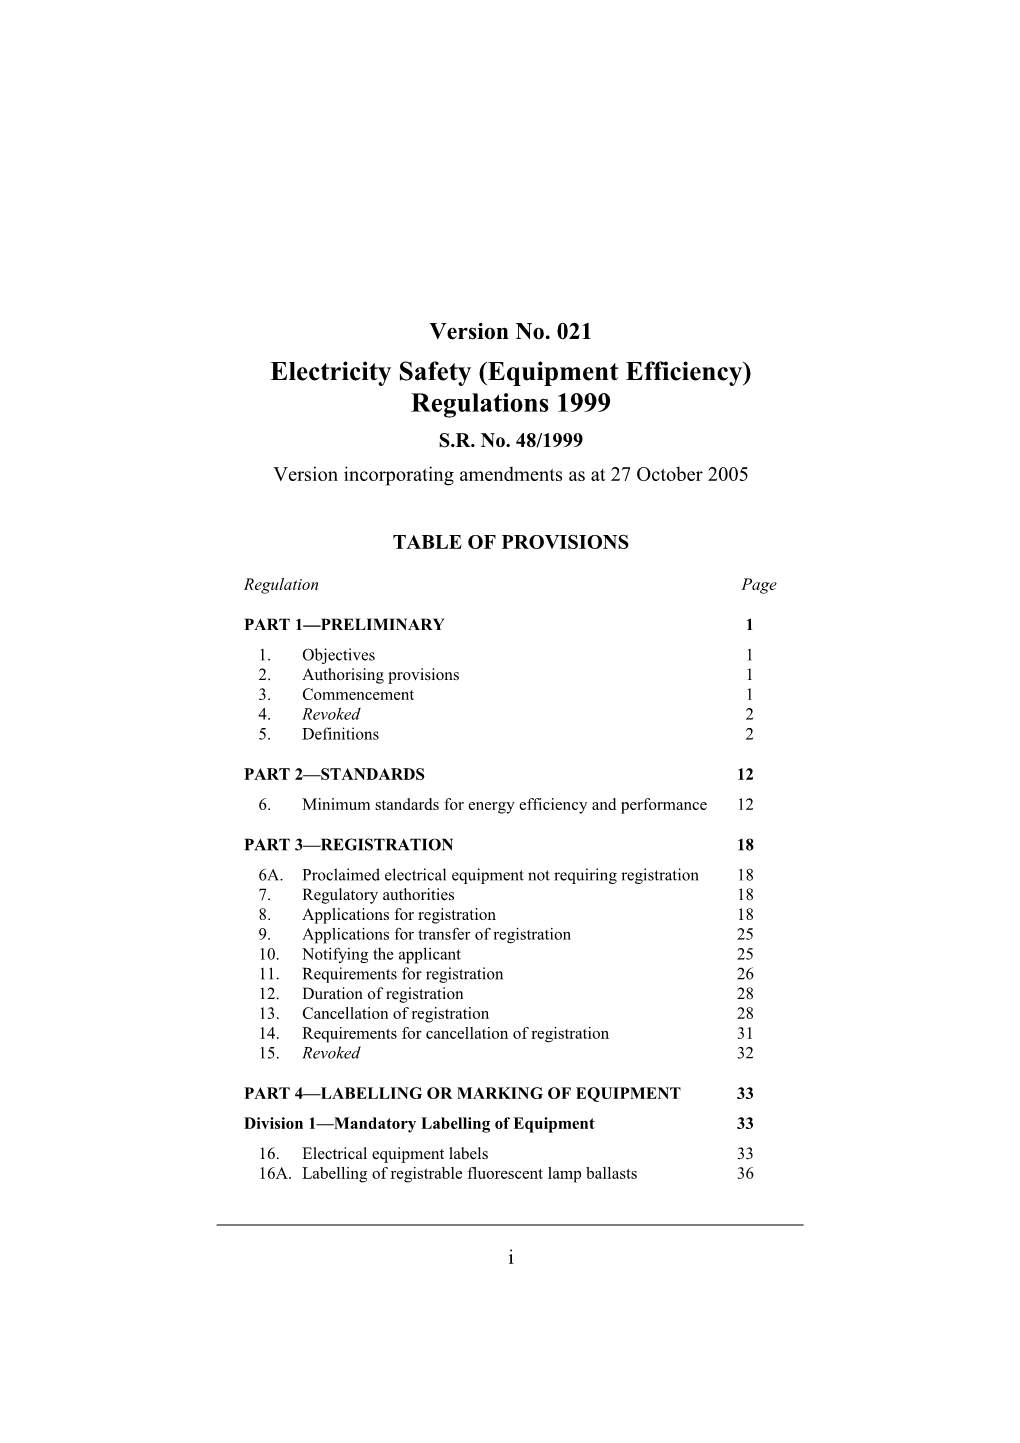 Electricity Safety (Equipment Efficiency) Regulations 1999